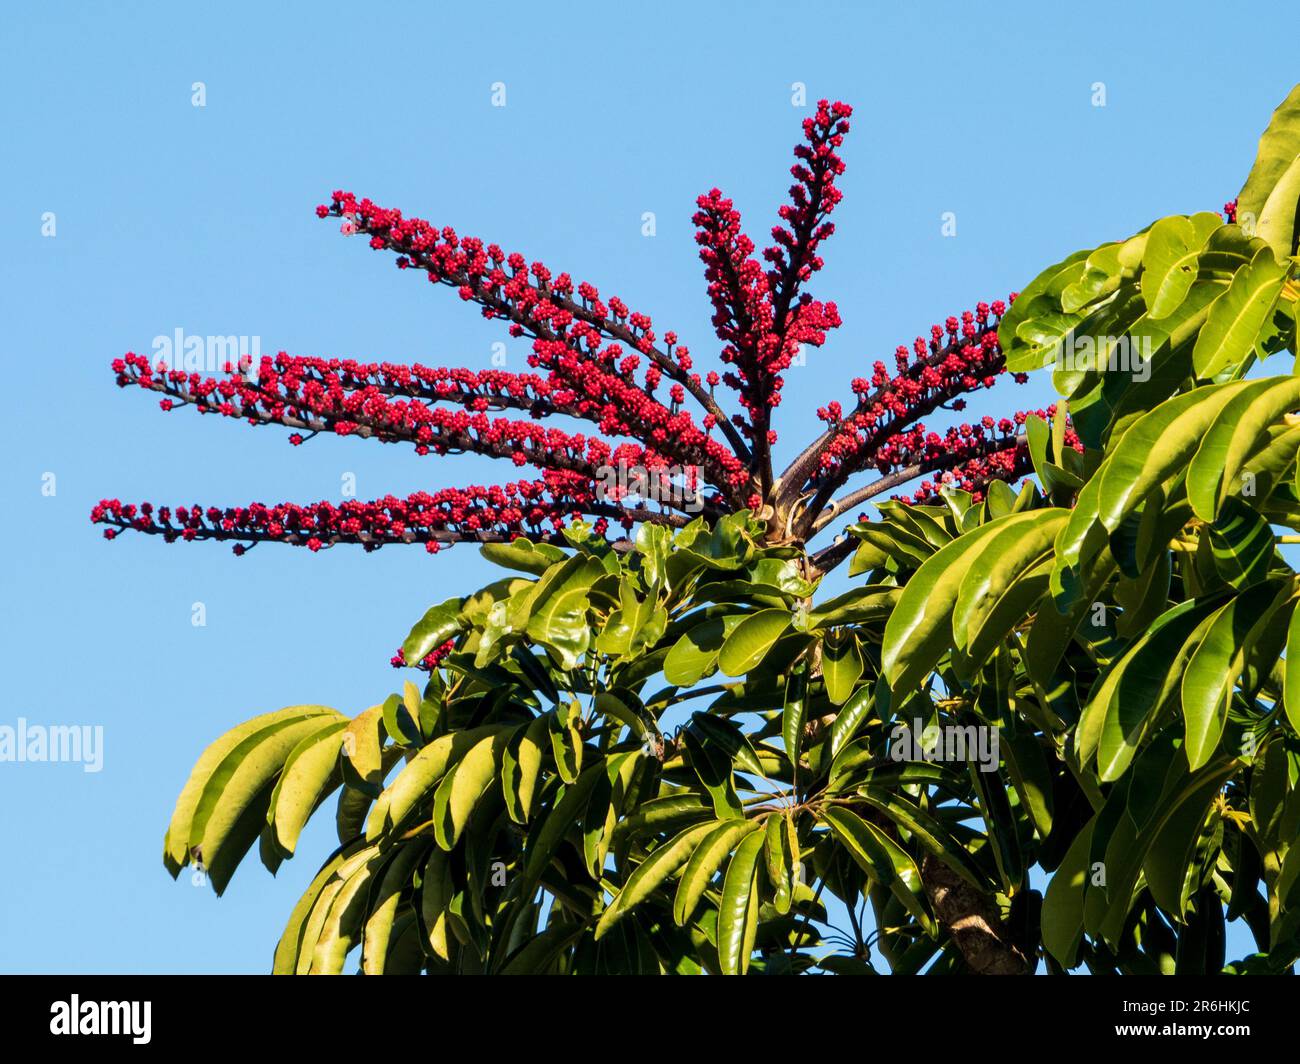 Large branched clusters of small red flowers on an umbrella tree, green leaves, Australian coastal garden Stock Photo